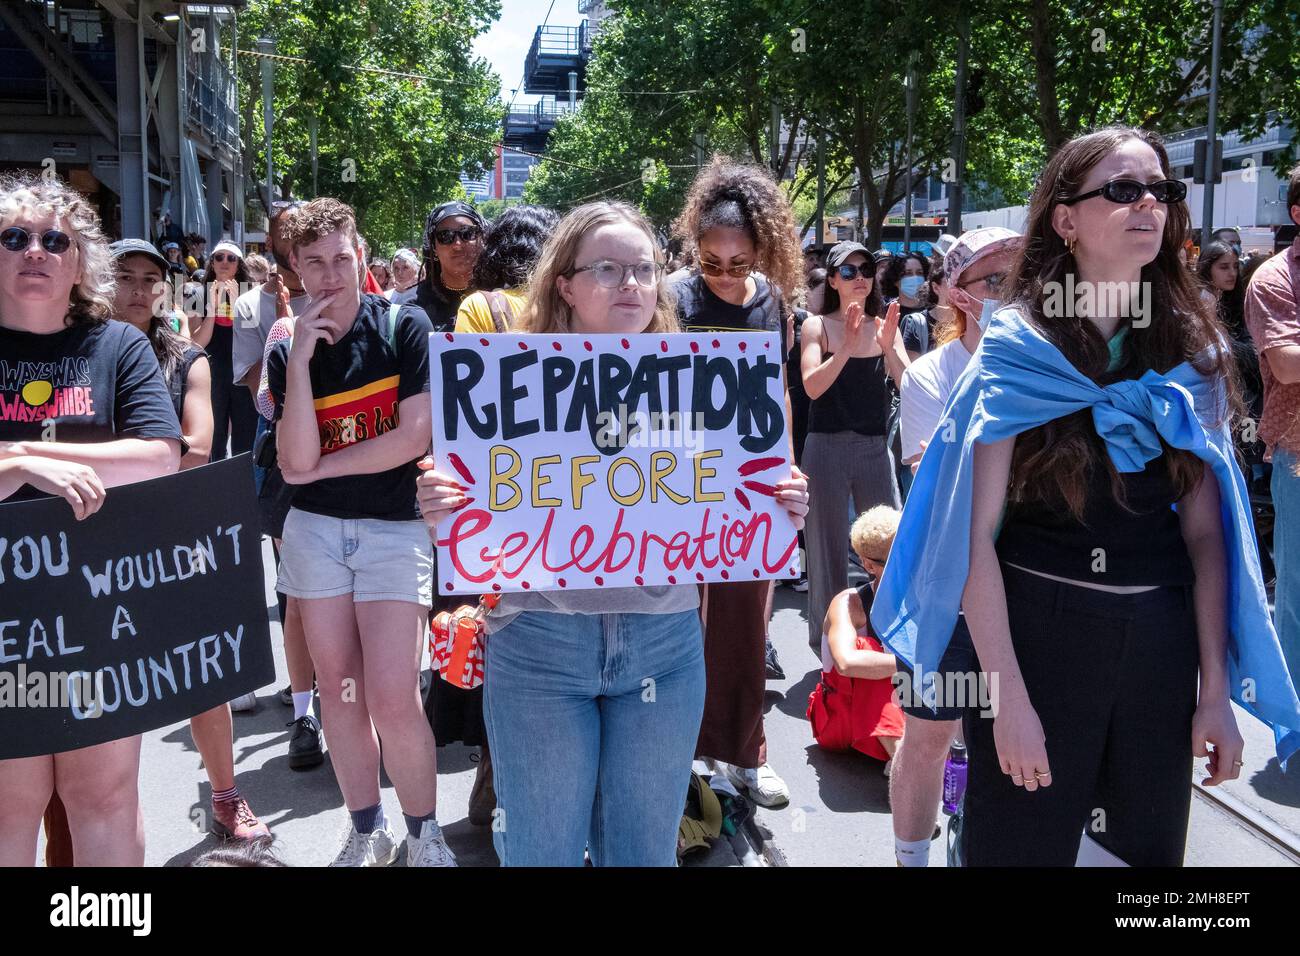 Melbourne, Australia, 26 January, 2023. A female protester with a sign 'reparations' before celebrations' during the annual Invasion Day protest in Melbourne, organized by Indigenous Australians and their allies, calls for an end to the celebration of Australia Day and for the recognition of Indigenous sovereignty. Credit: Michael Currie/Speed Media/Alamy Live News Stock Photo